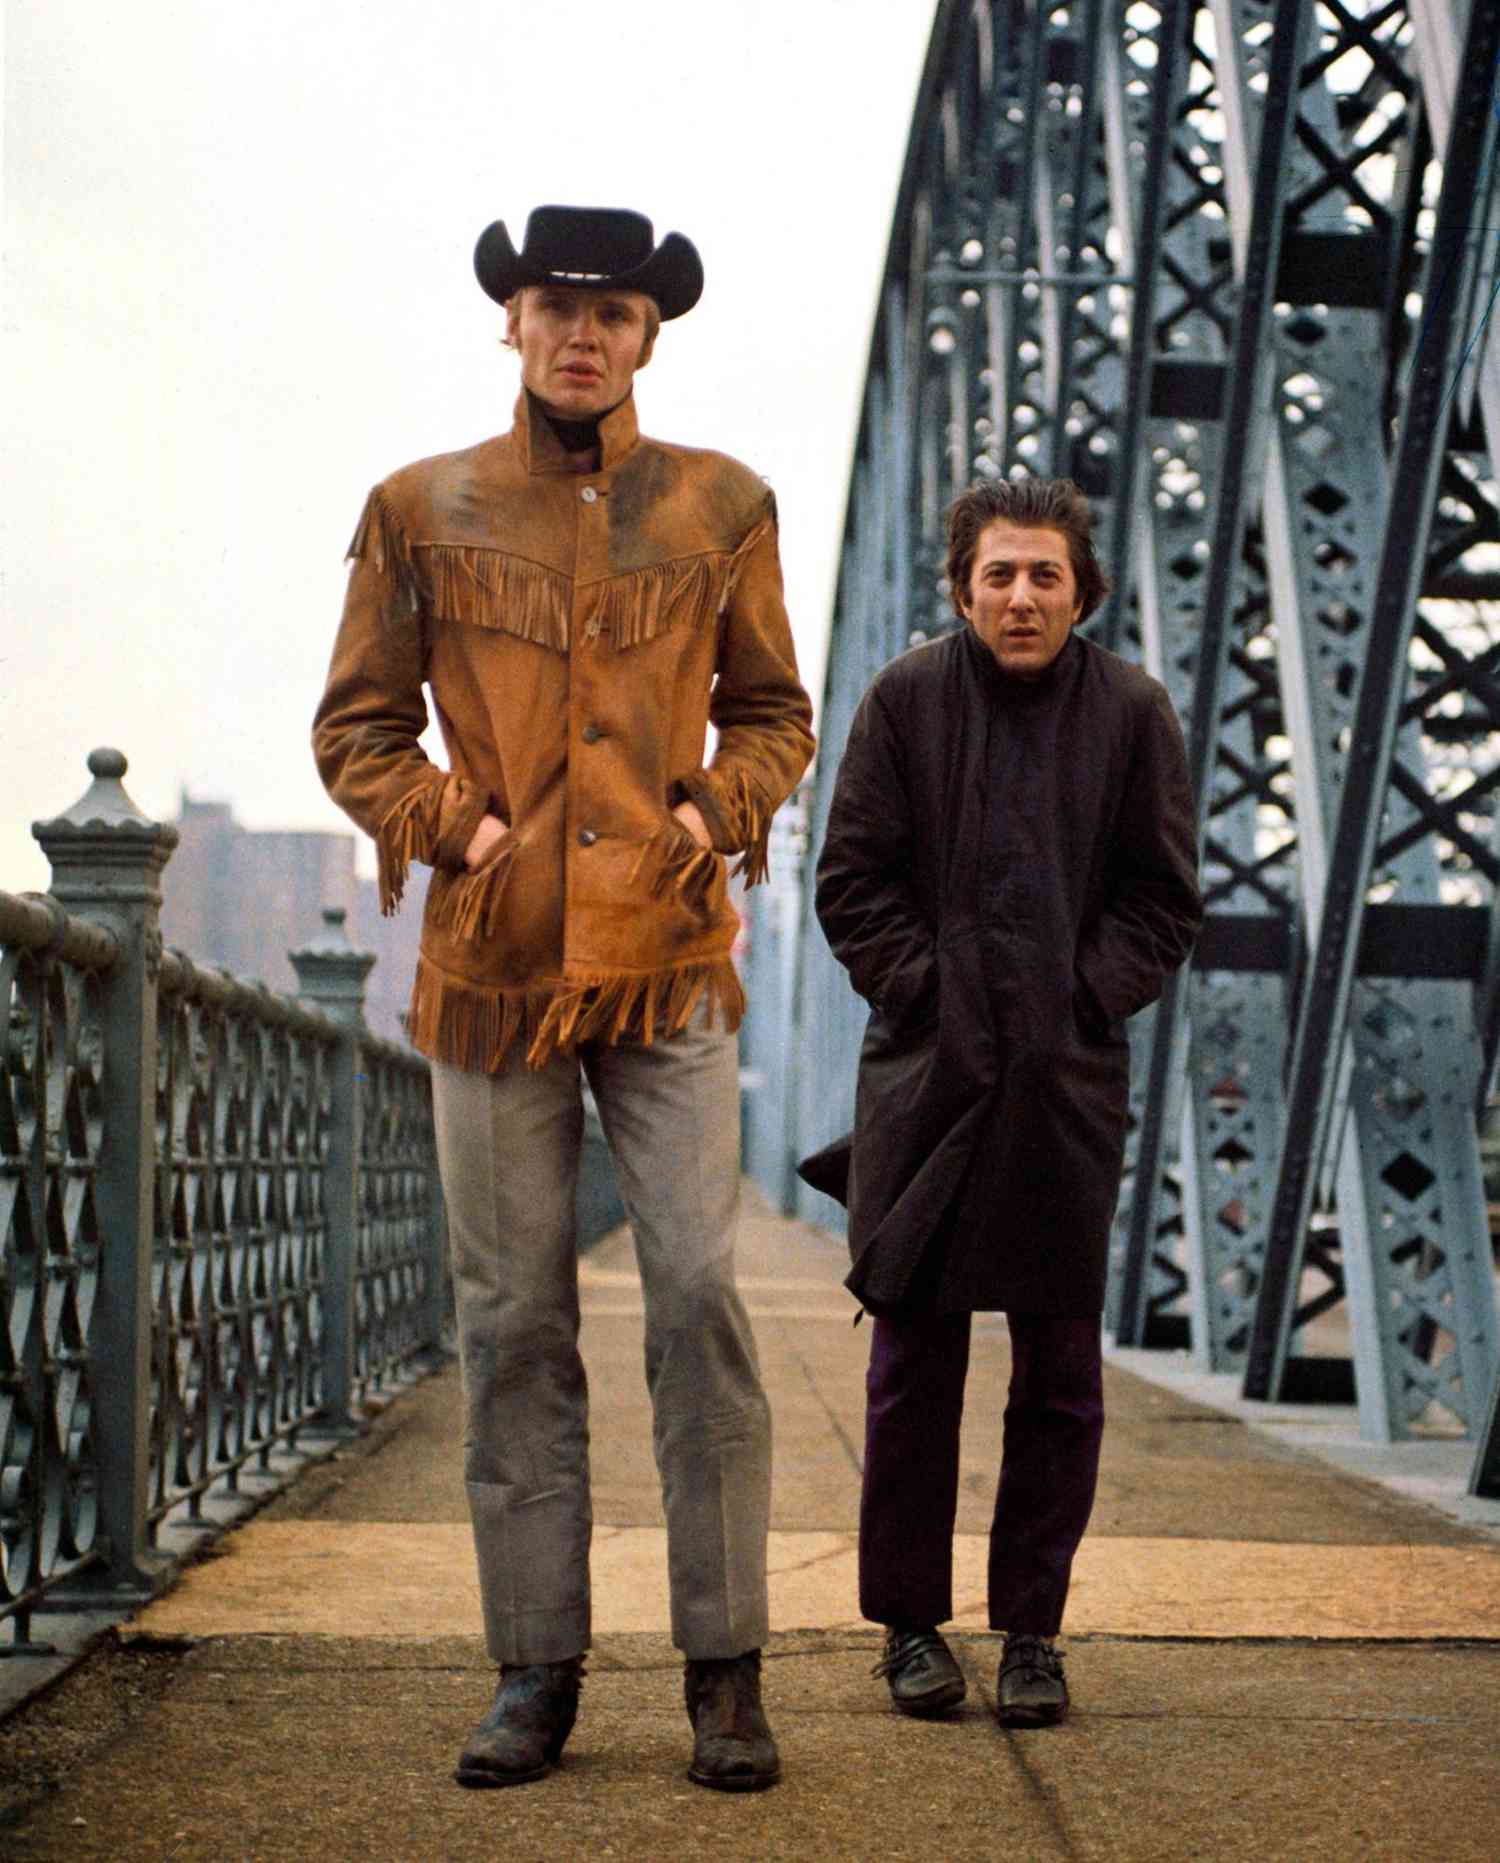 Midnight Cowboy based on the novel&nbsp;Midnight Cowboy by James Leo Herlihy